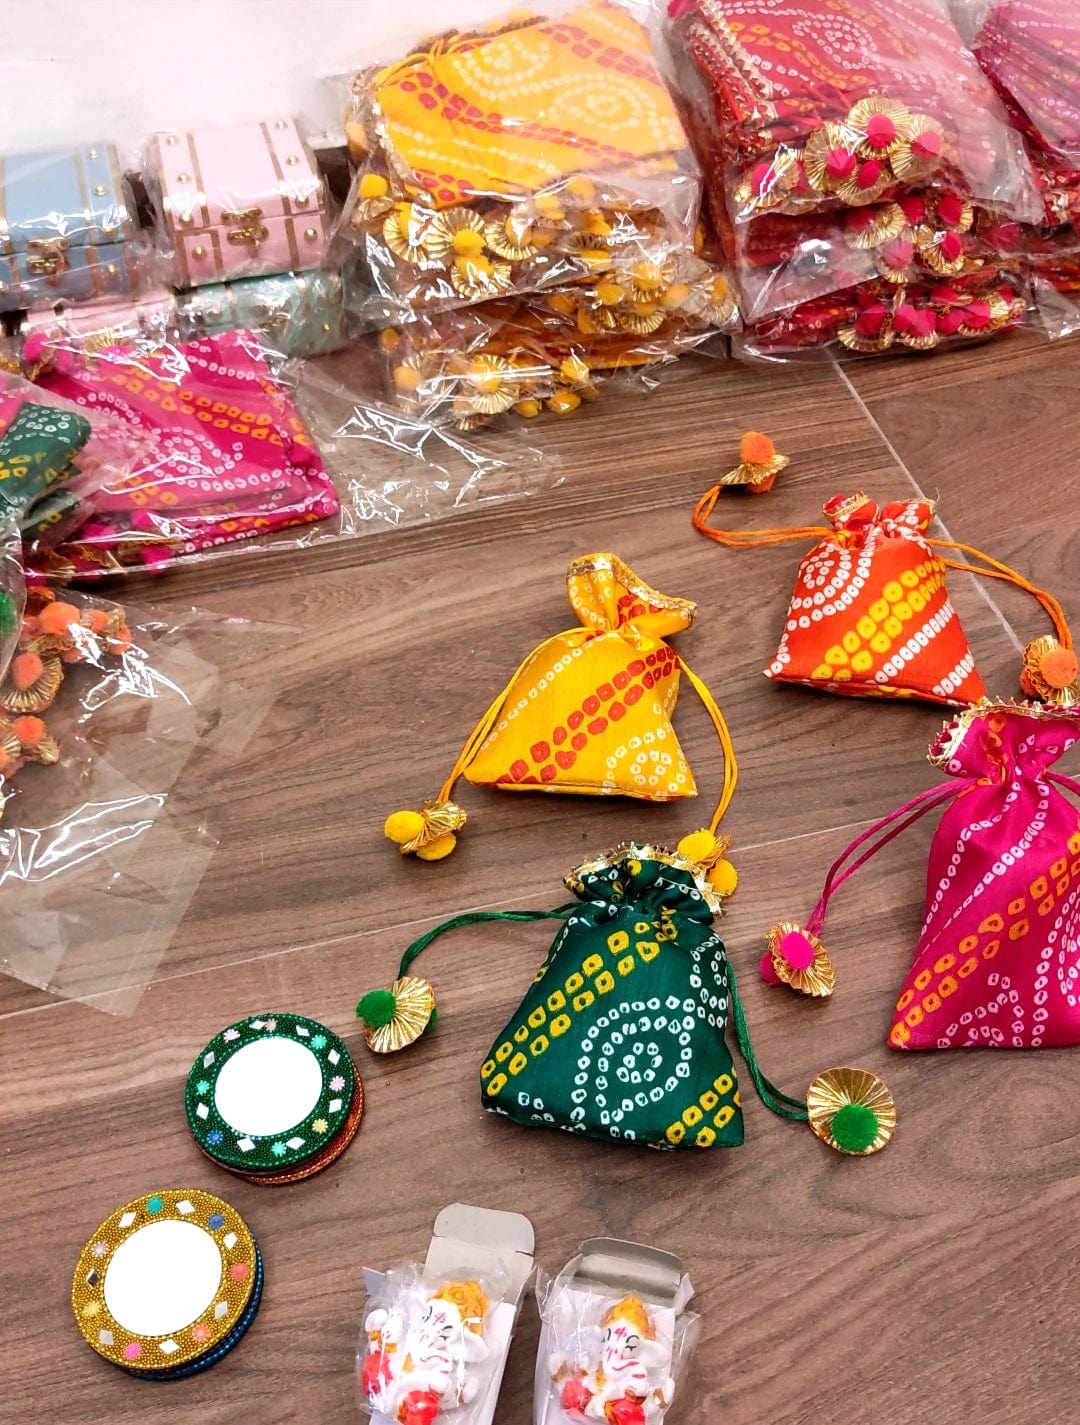 150 Rs per combo on buying in bulk | Contact at 8619550223 ganesh ji hampers Gift 🎁 Hamper Favor Combo for Ganesh Chaturthi 2023 🕉️ | Ganpati Return Gifts for friends & family